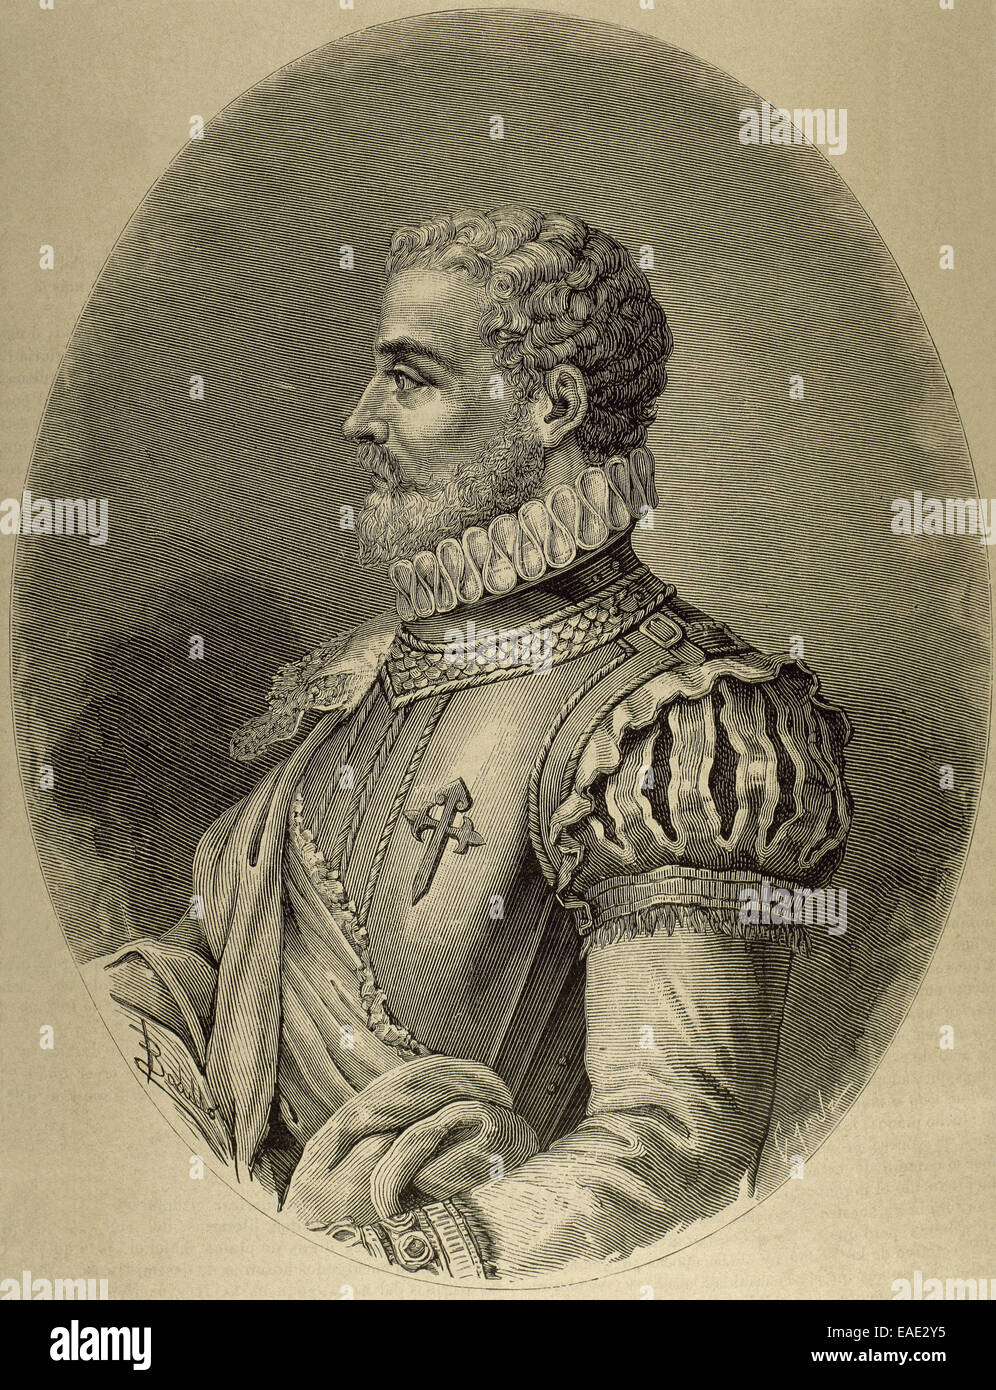 Alonso de Ercilla (1533-1594). Spanish nobleman, soldier and epic poet. Portrait. Engraving by Capuz. 19th century. Stock Photo